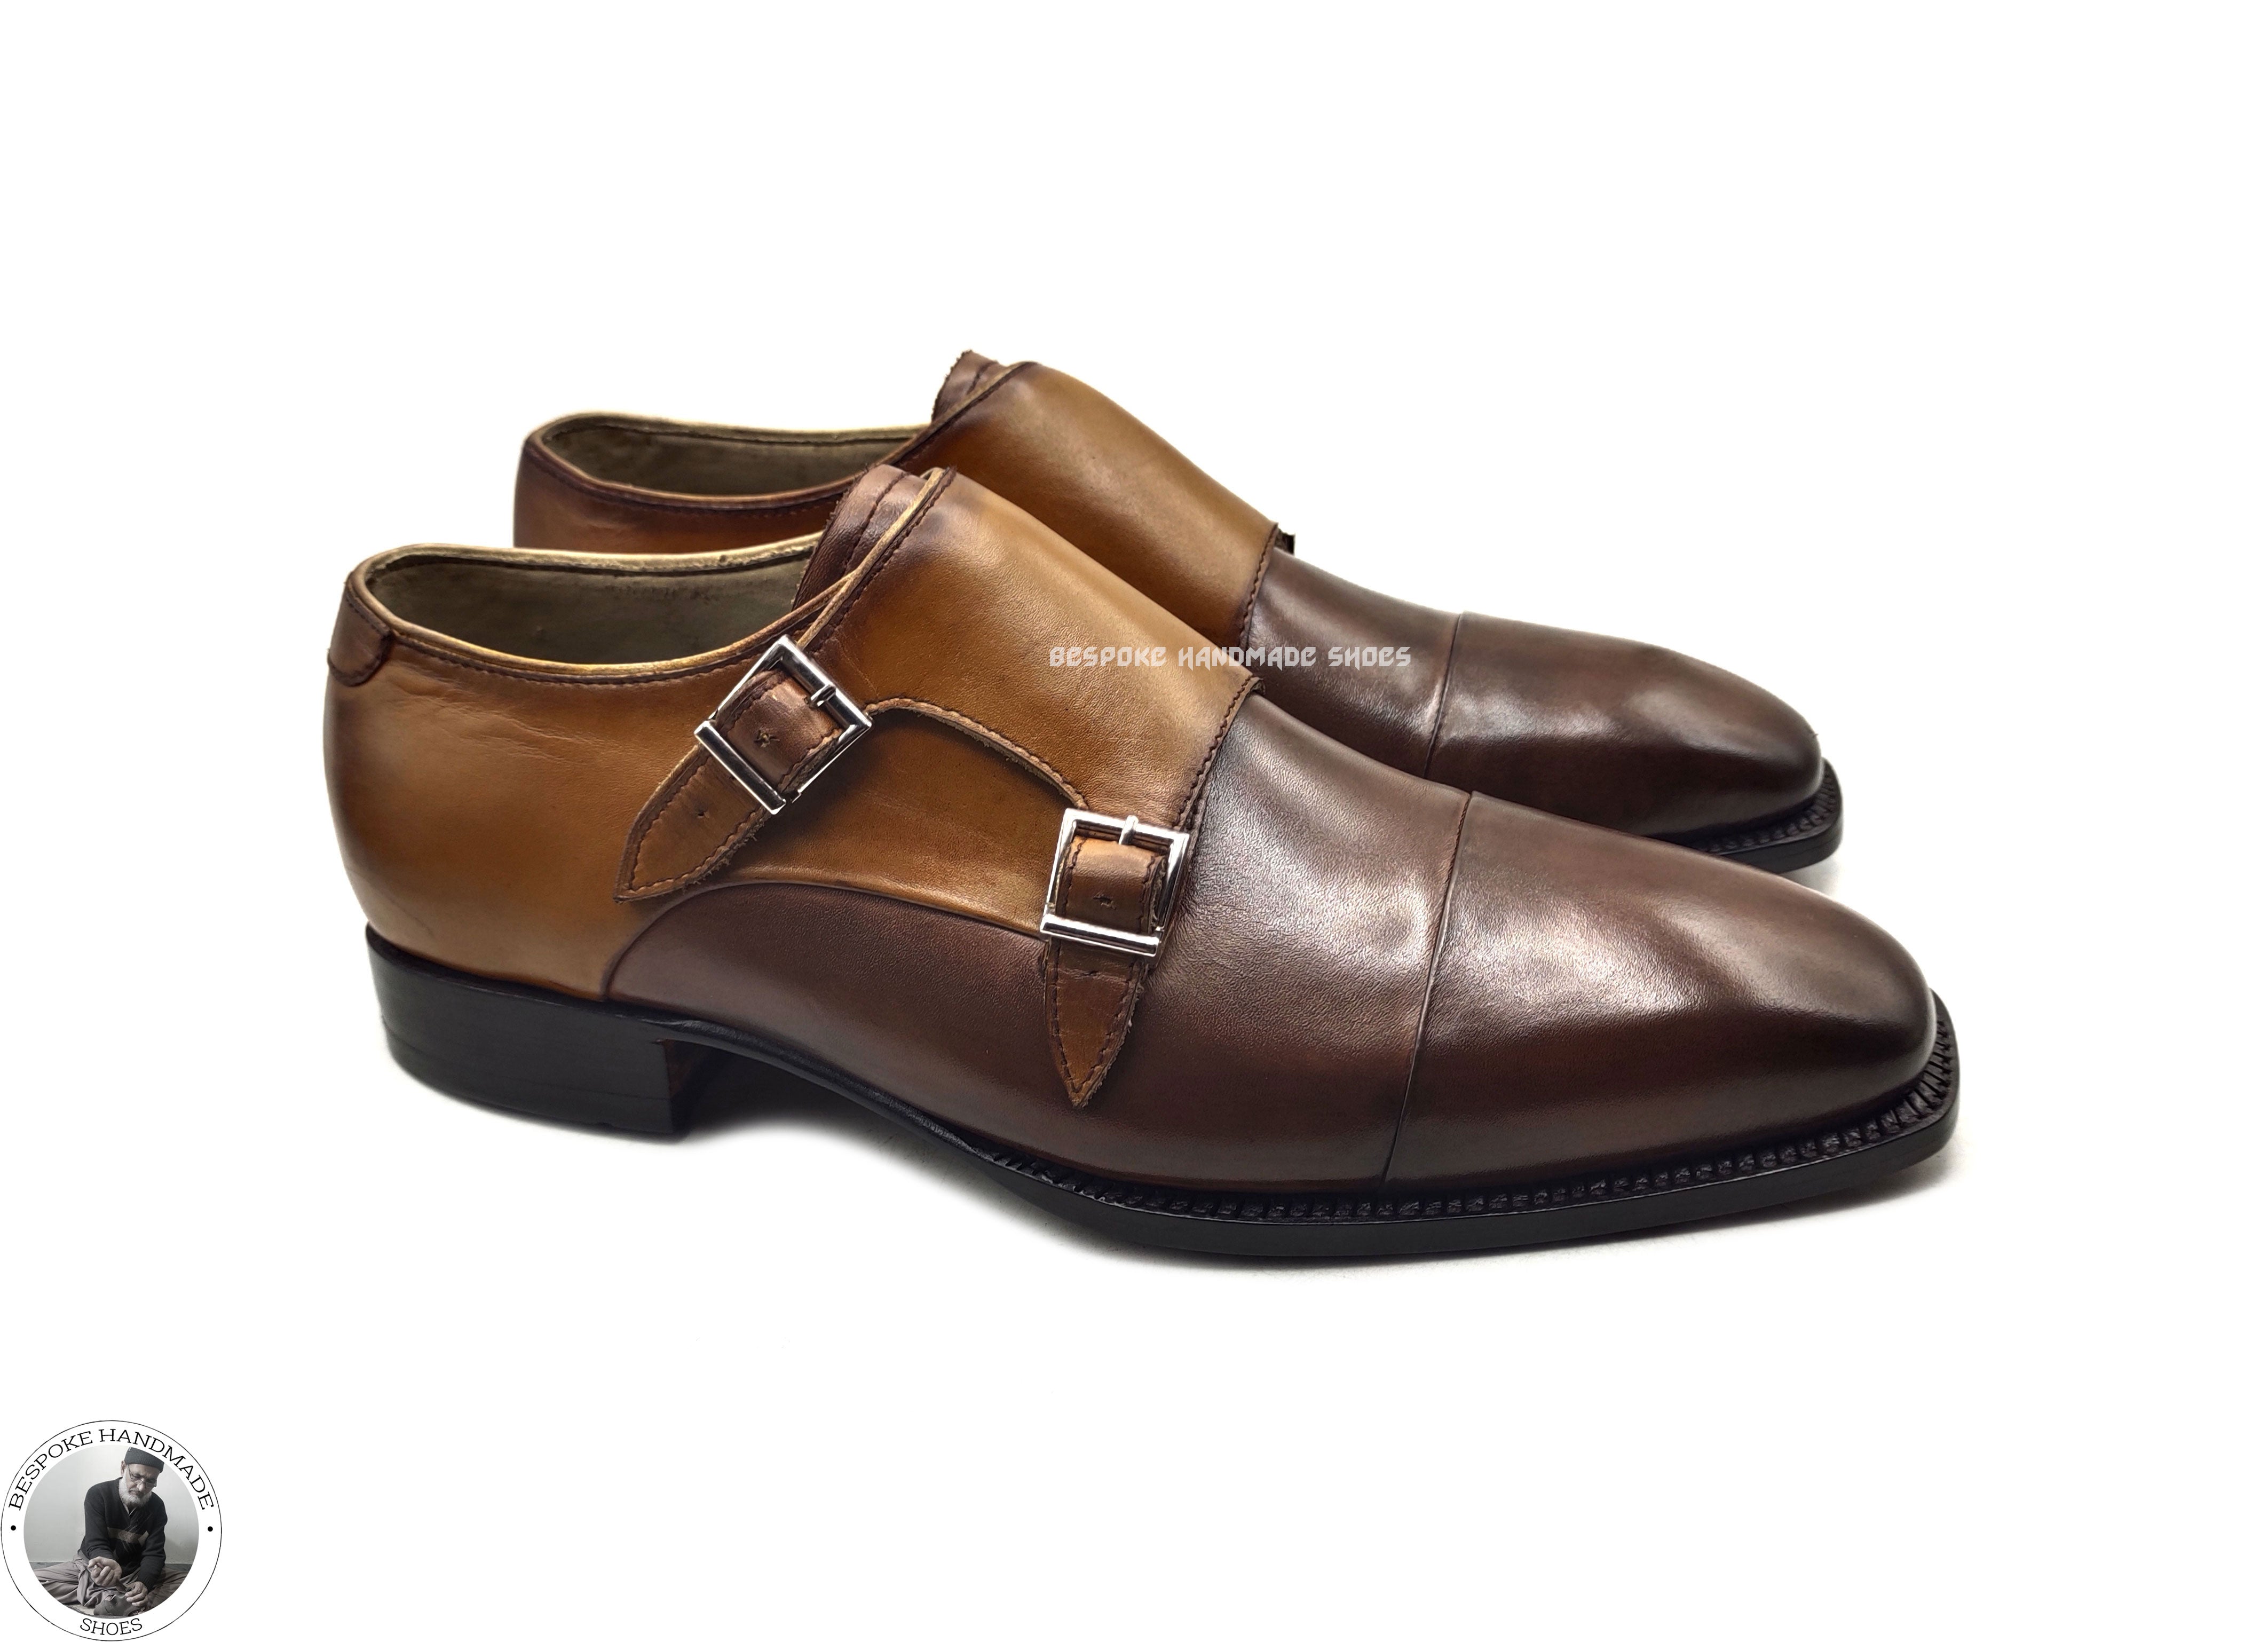 Bespoke Handmade Shoes, Two Tone Chocolate Brown & Tan Leather Double Monk Strap Dress / Formal Shoe